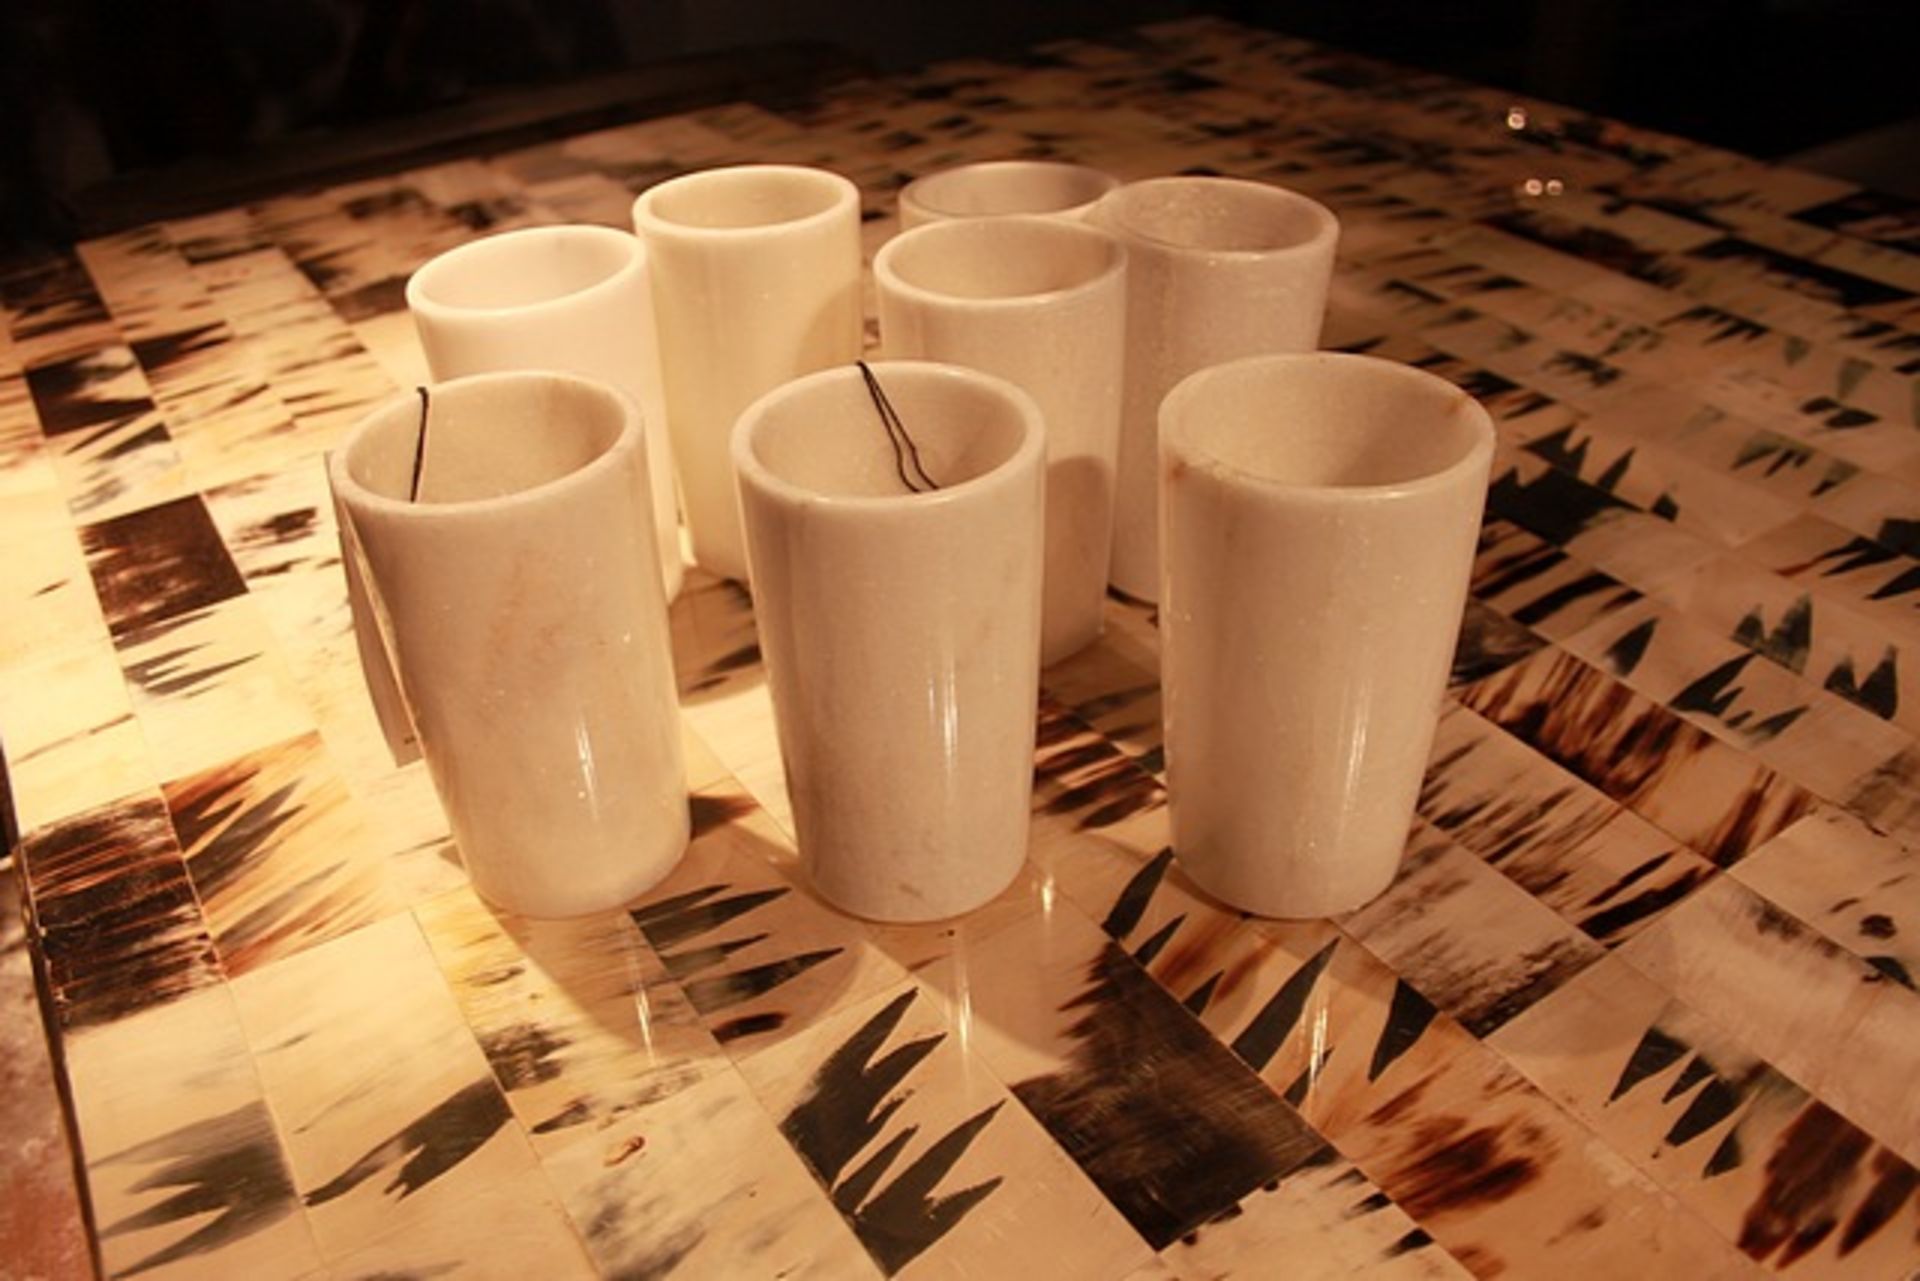 Tumbler silvio white white marble polished set of 2, bringing classic natural materials into the